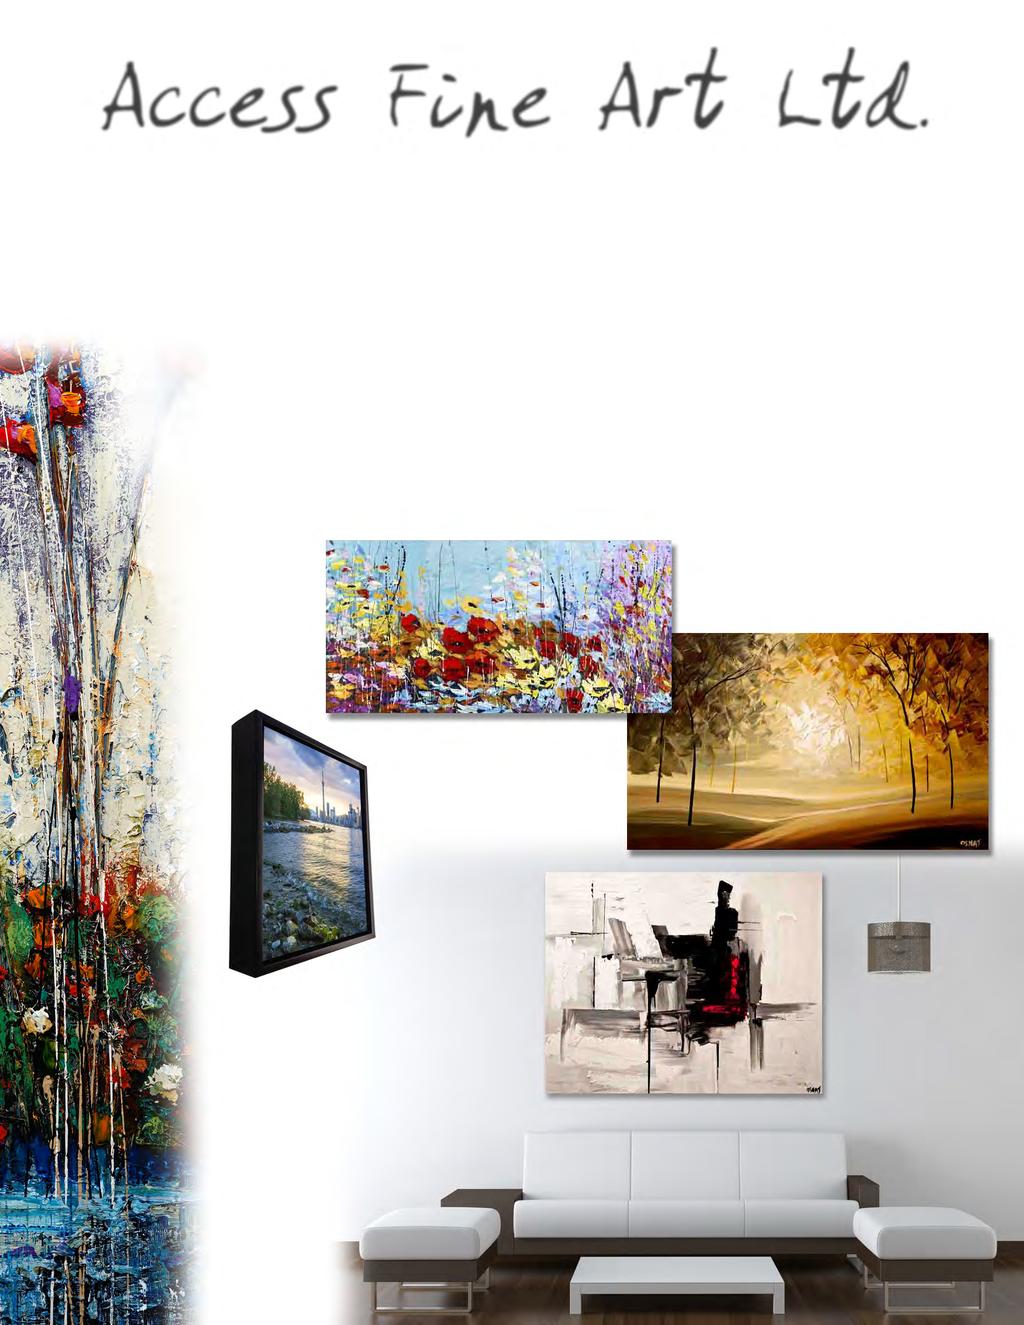 Access Fine Art Ltd. Access Fine Art is one of the leading Canadian distributors of fine prints, posters, canvas reproductions and Giclée prints.